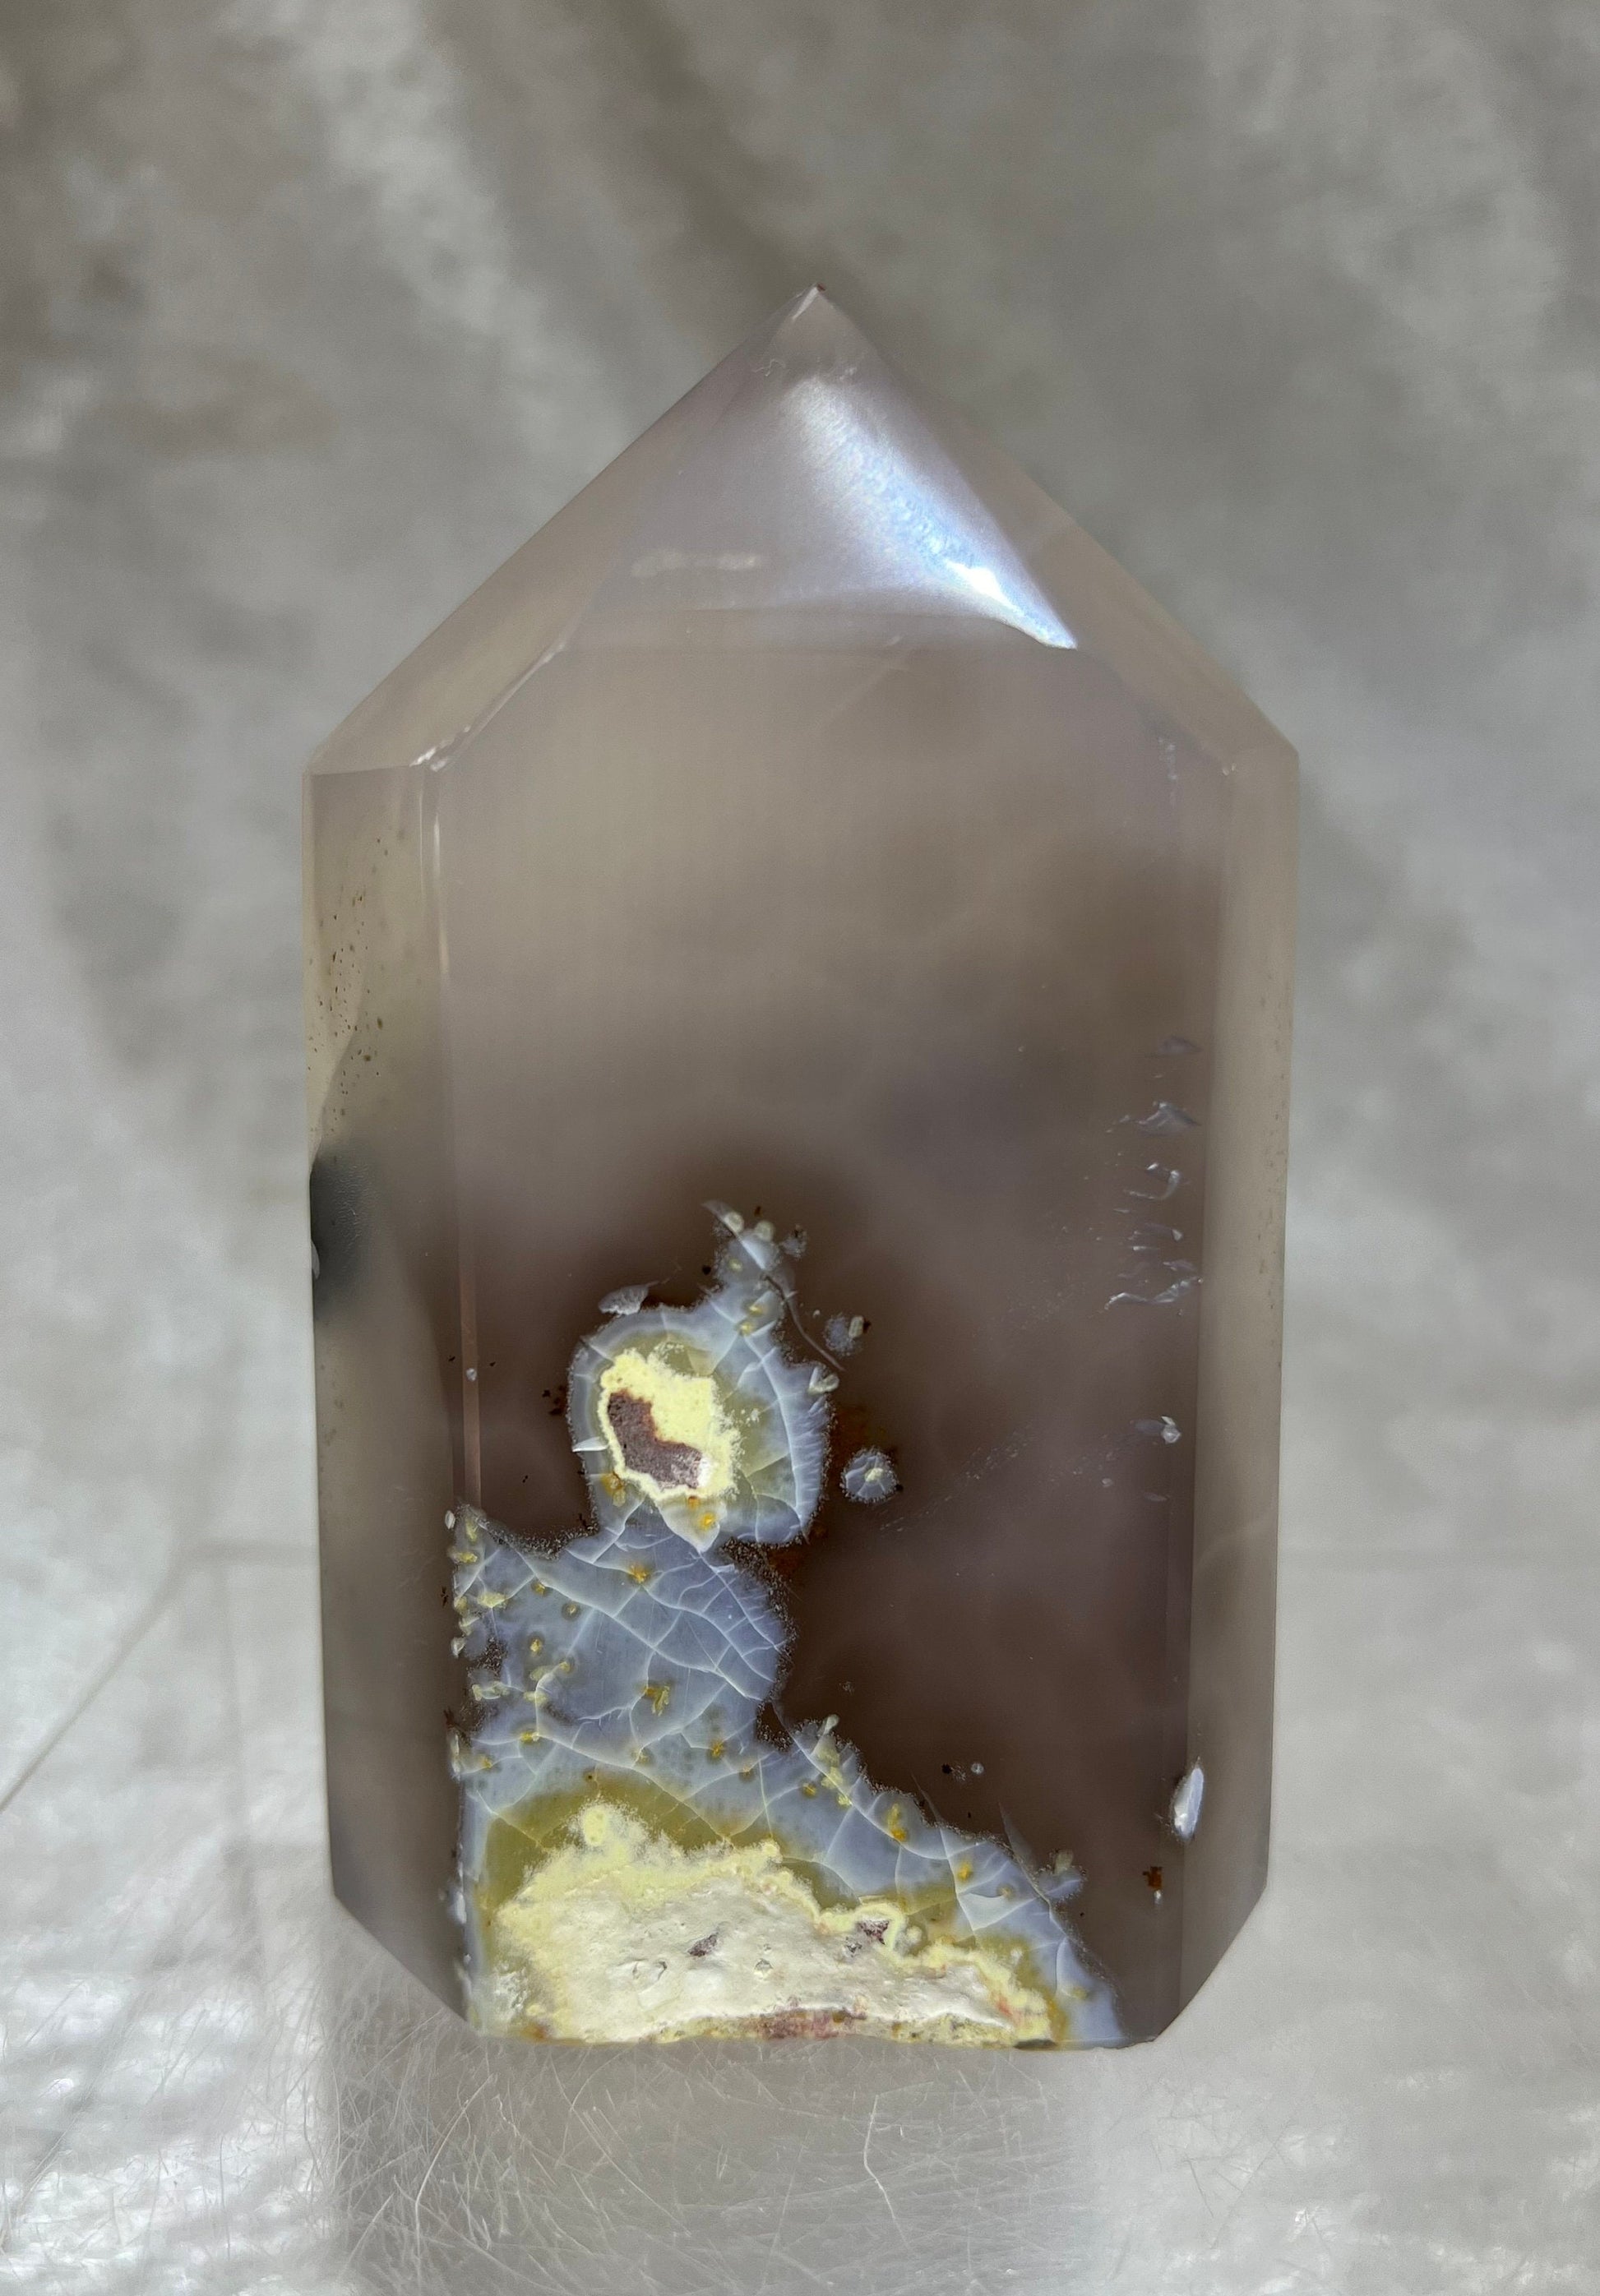 Amazing Druzy Agate Tower From Brazil. Incredible One Of A Kind Sugar Druzy! Wild Druzy Agate Tower.